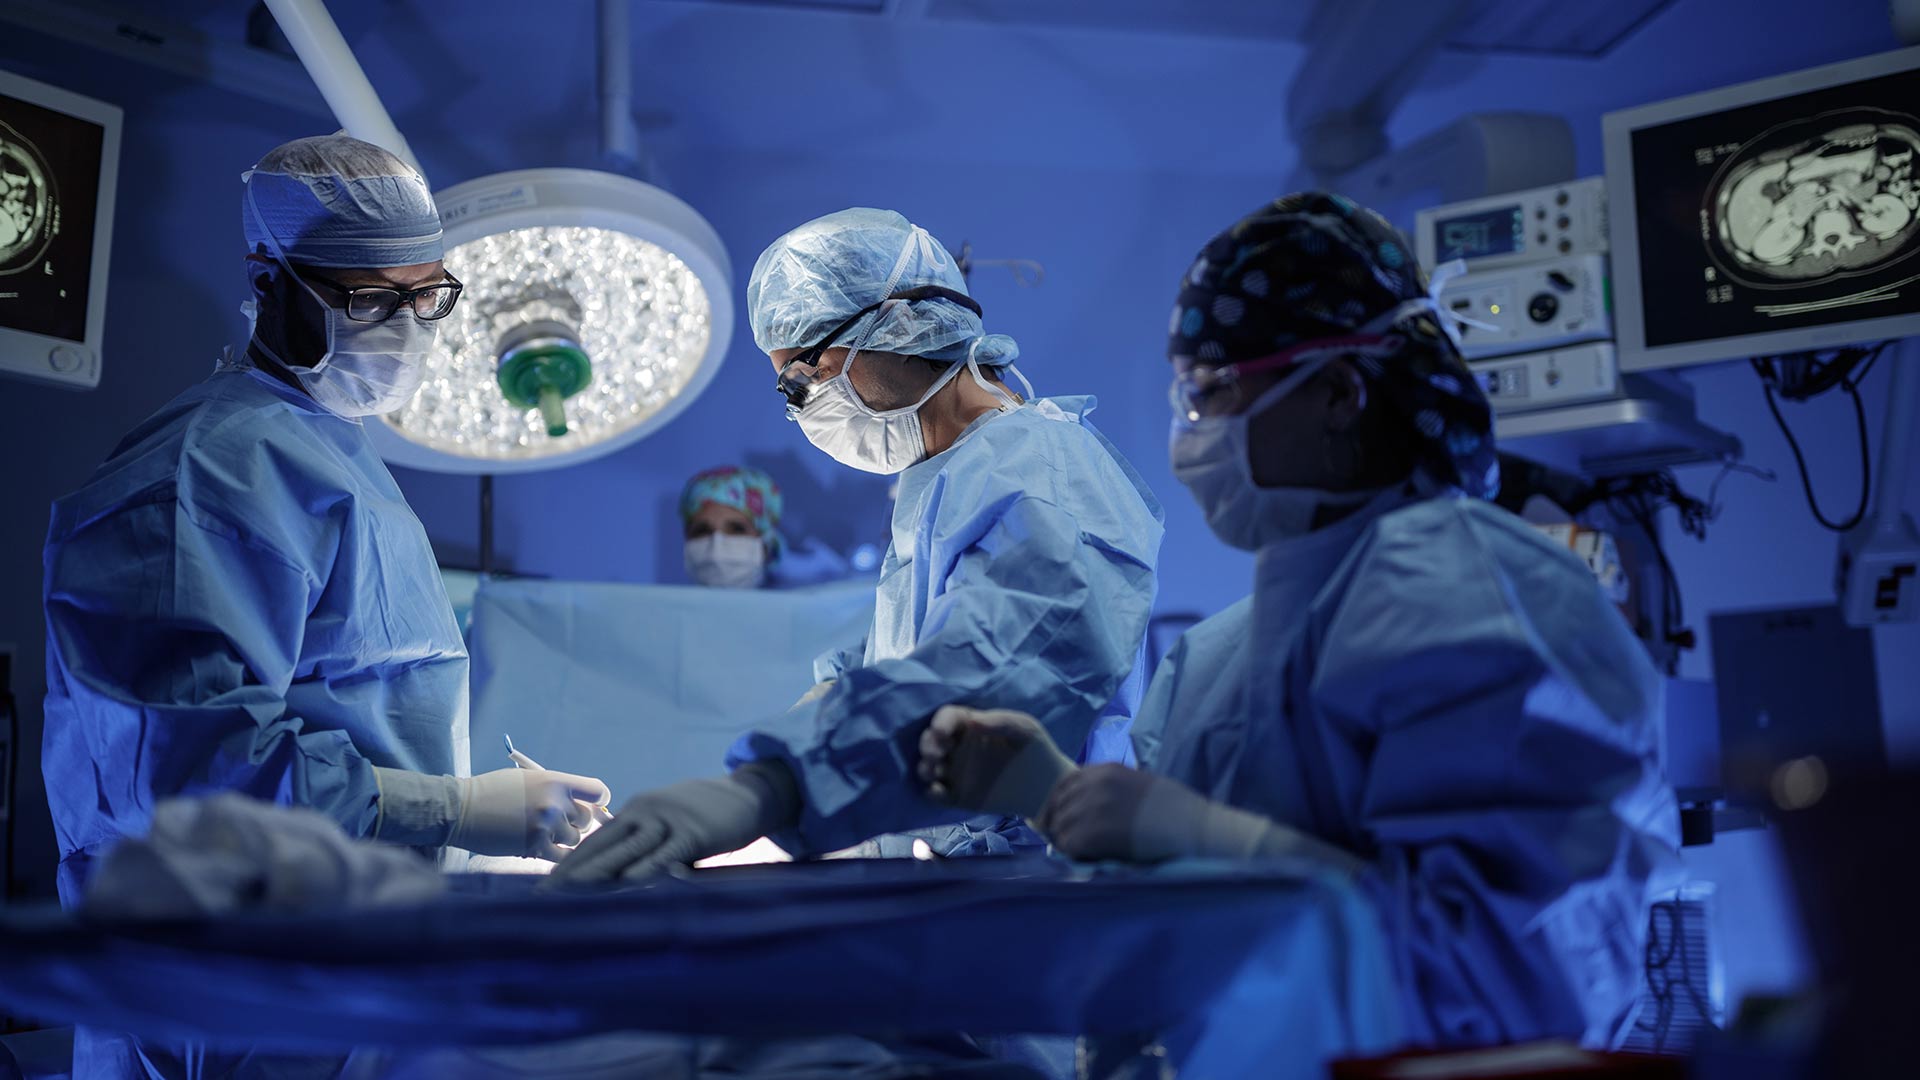 gastrointestinal oncology surgeons in operating room